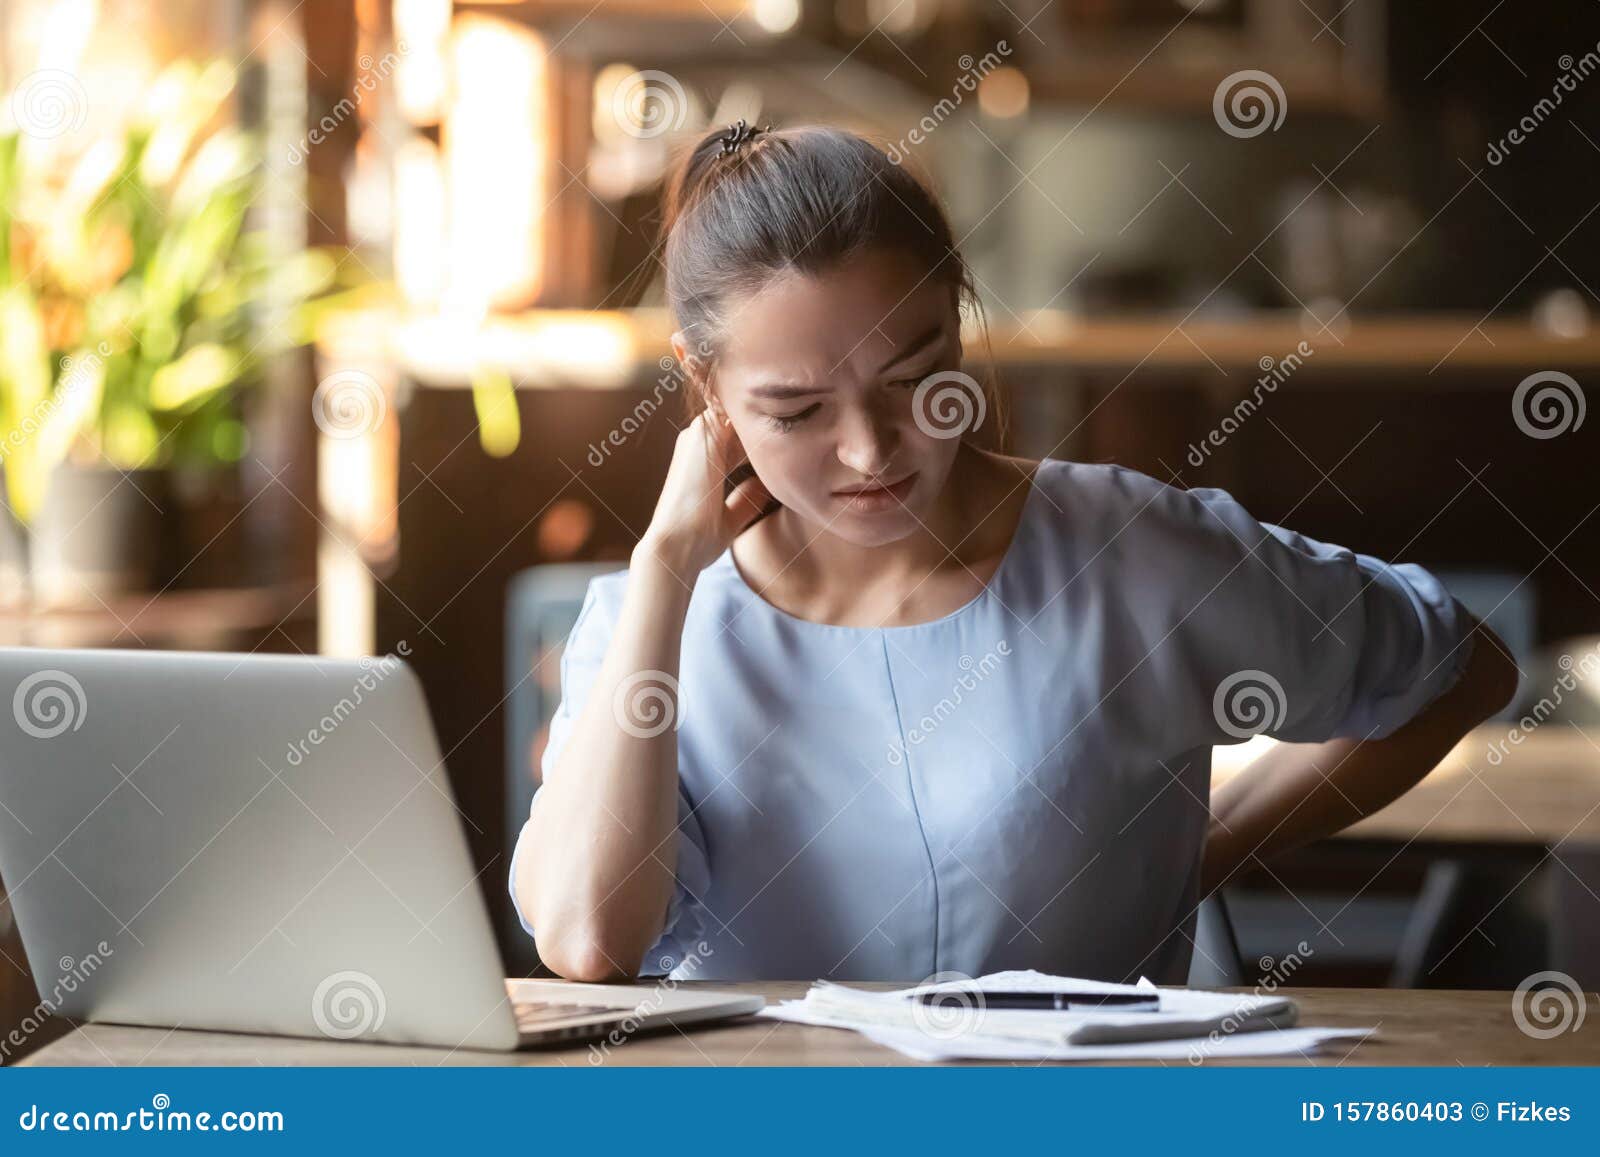 tired woman feeling pain after sedentary computer work in cafe